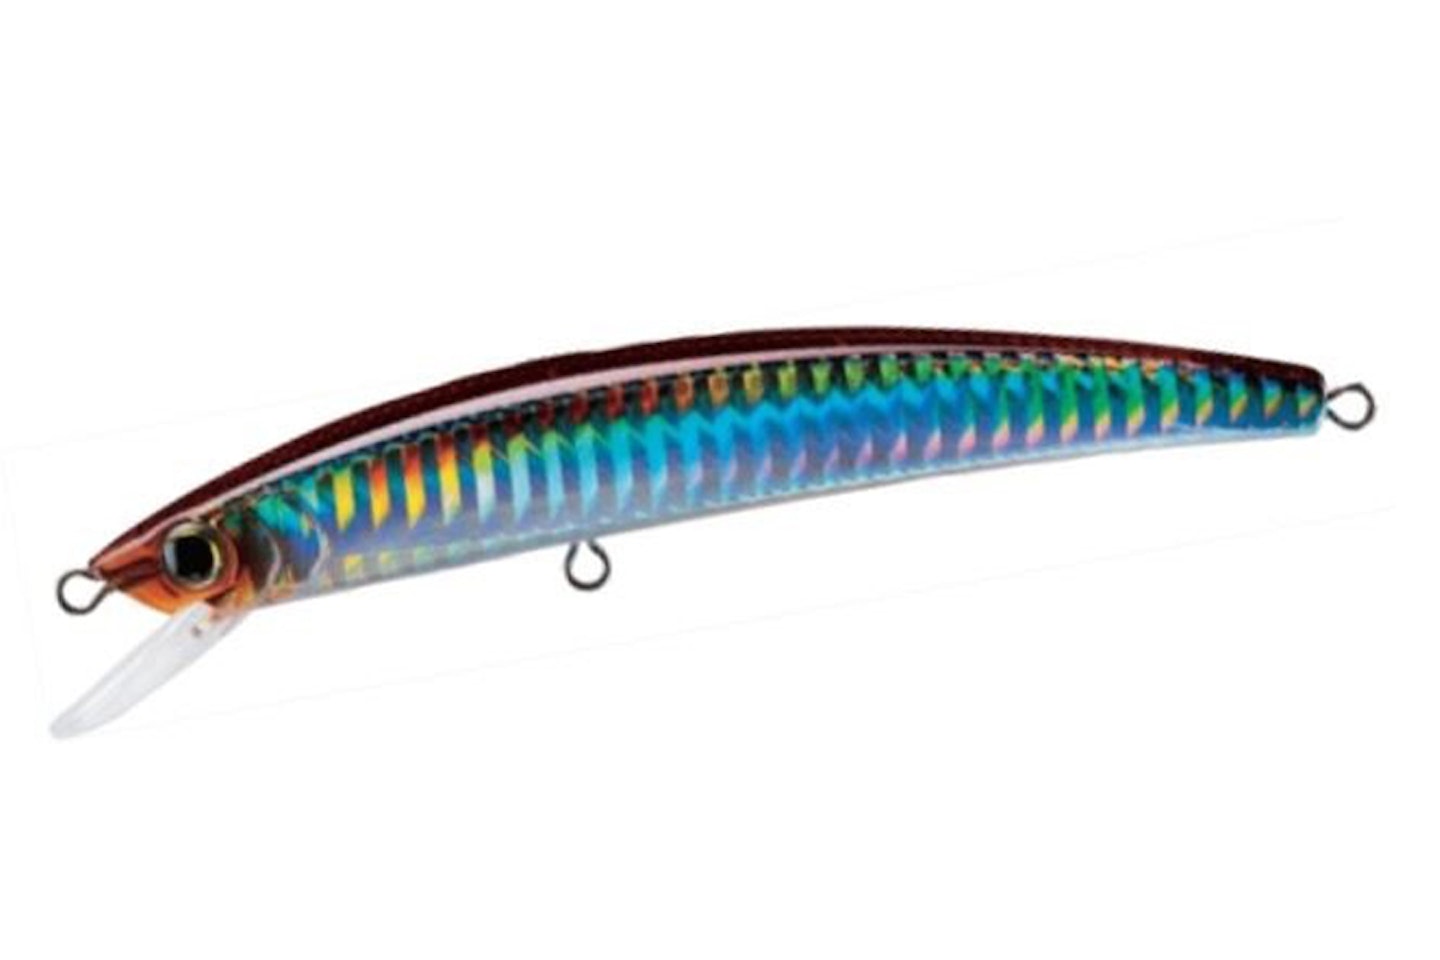 Best lures for pike fishing